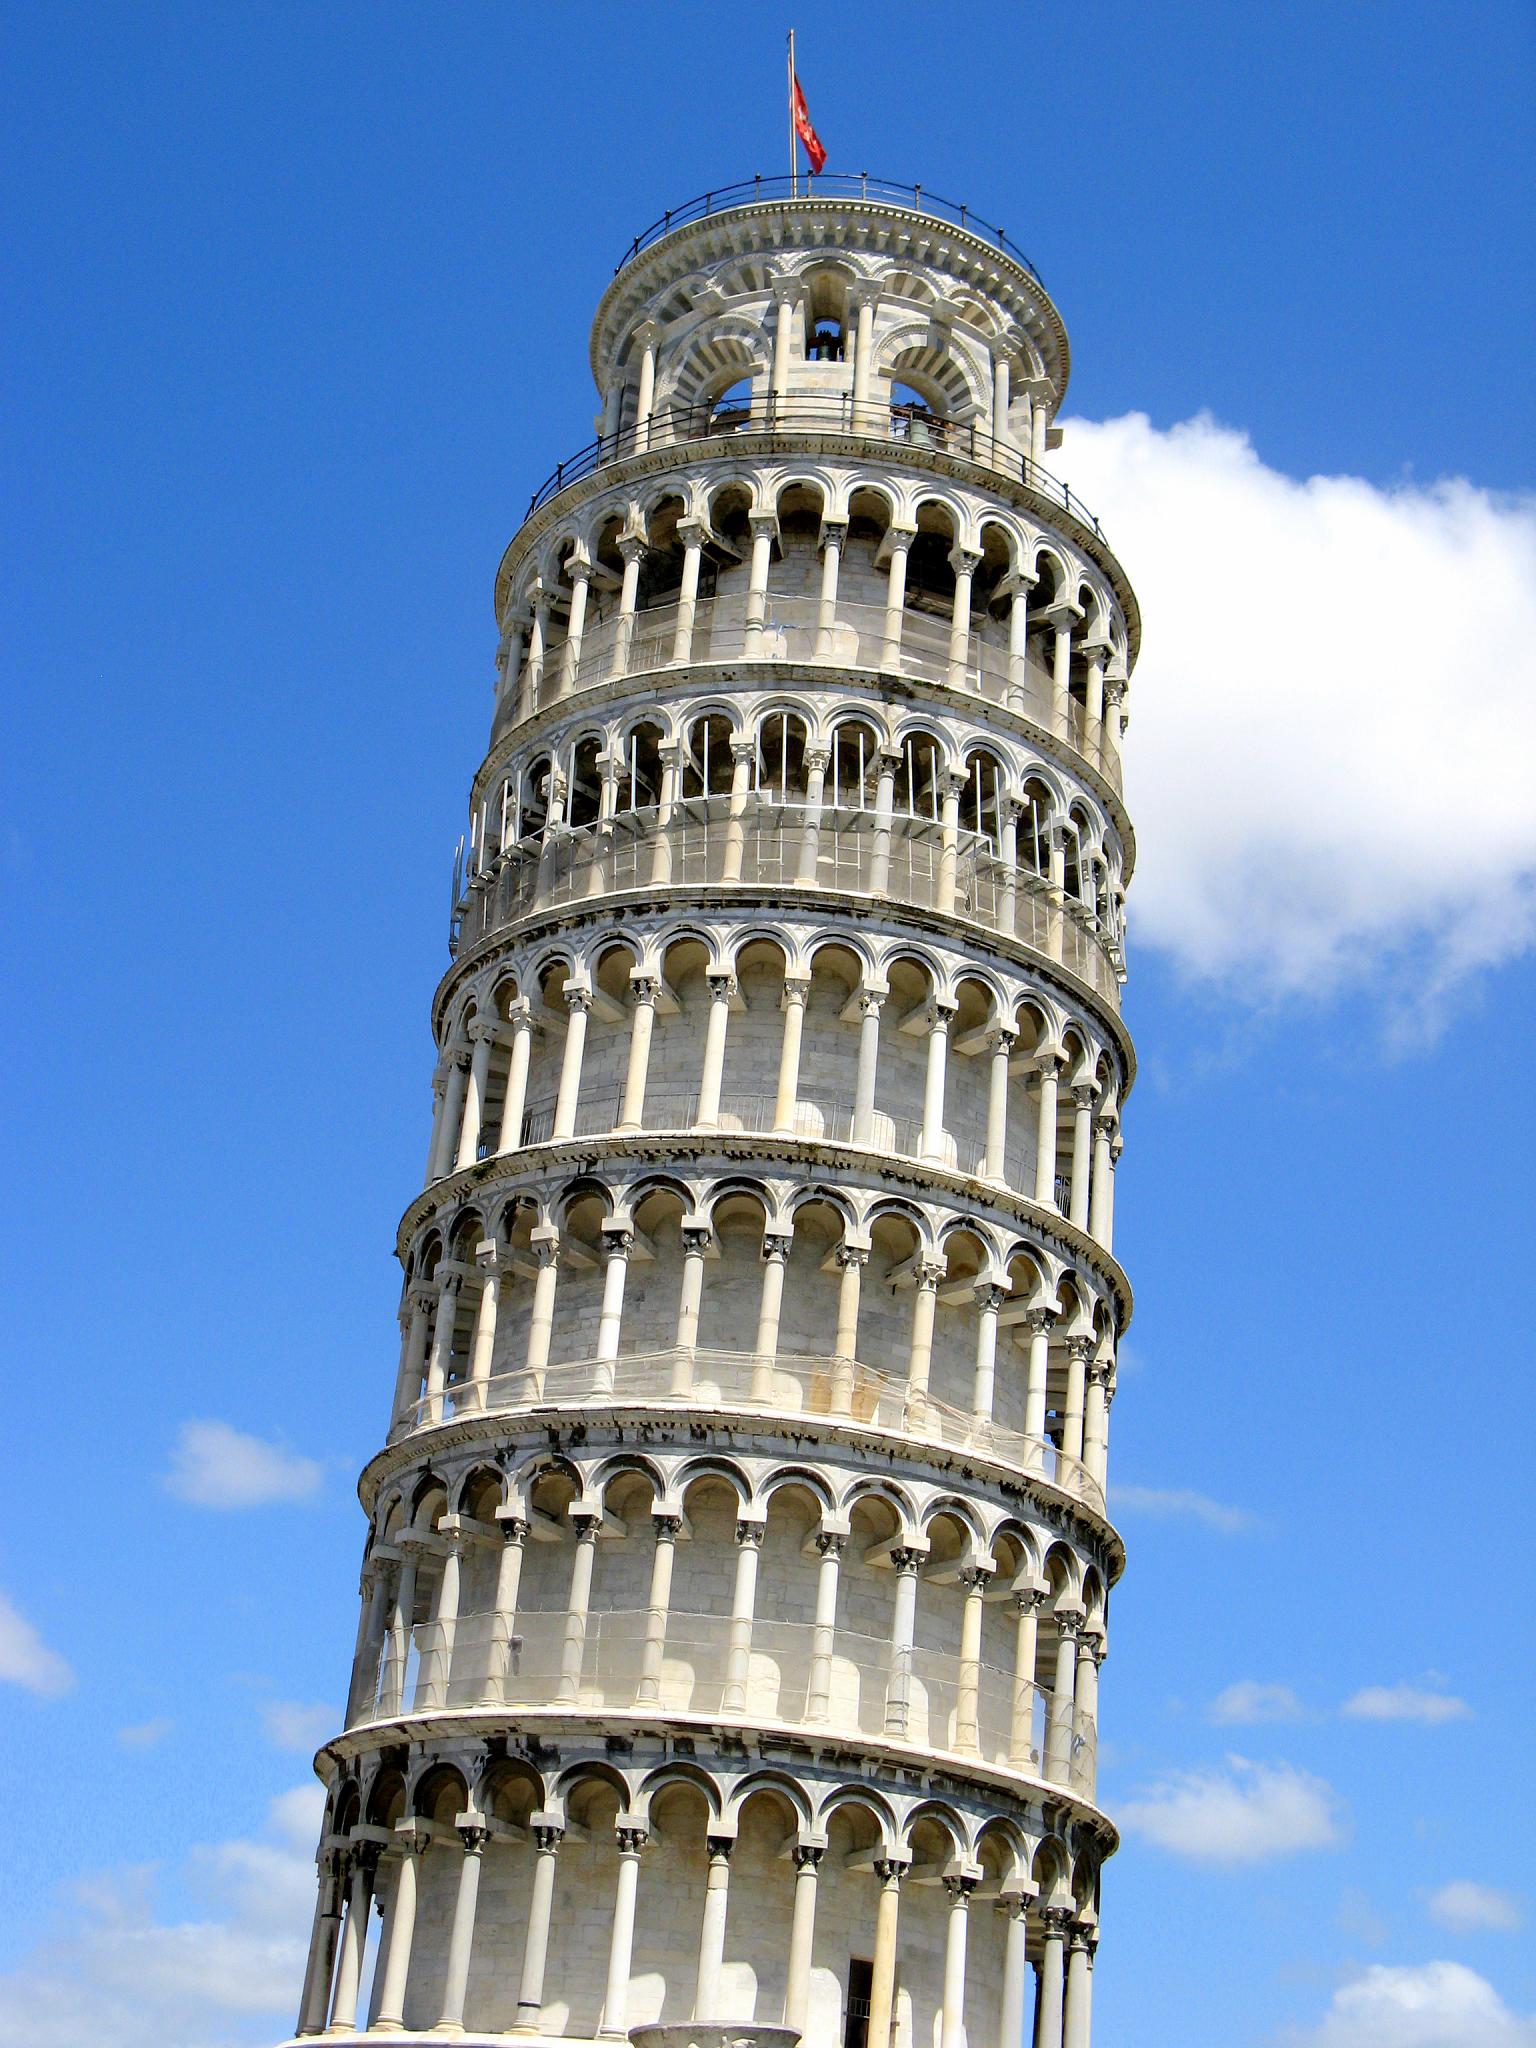 this is the leaning tower of the leaning tower